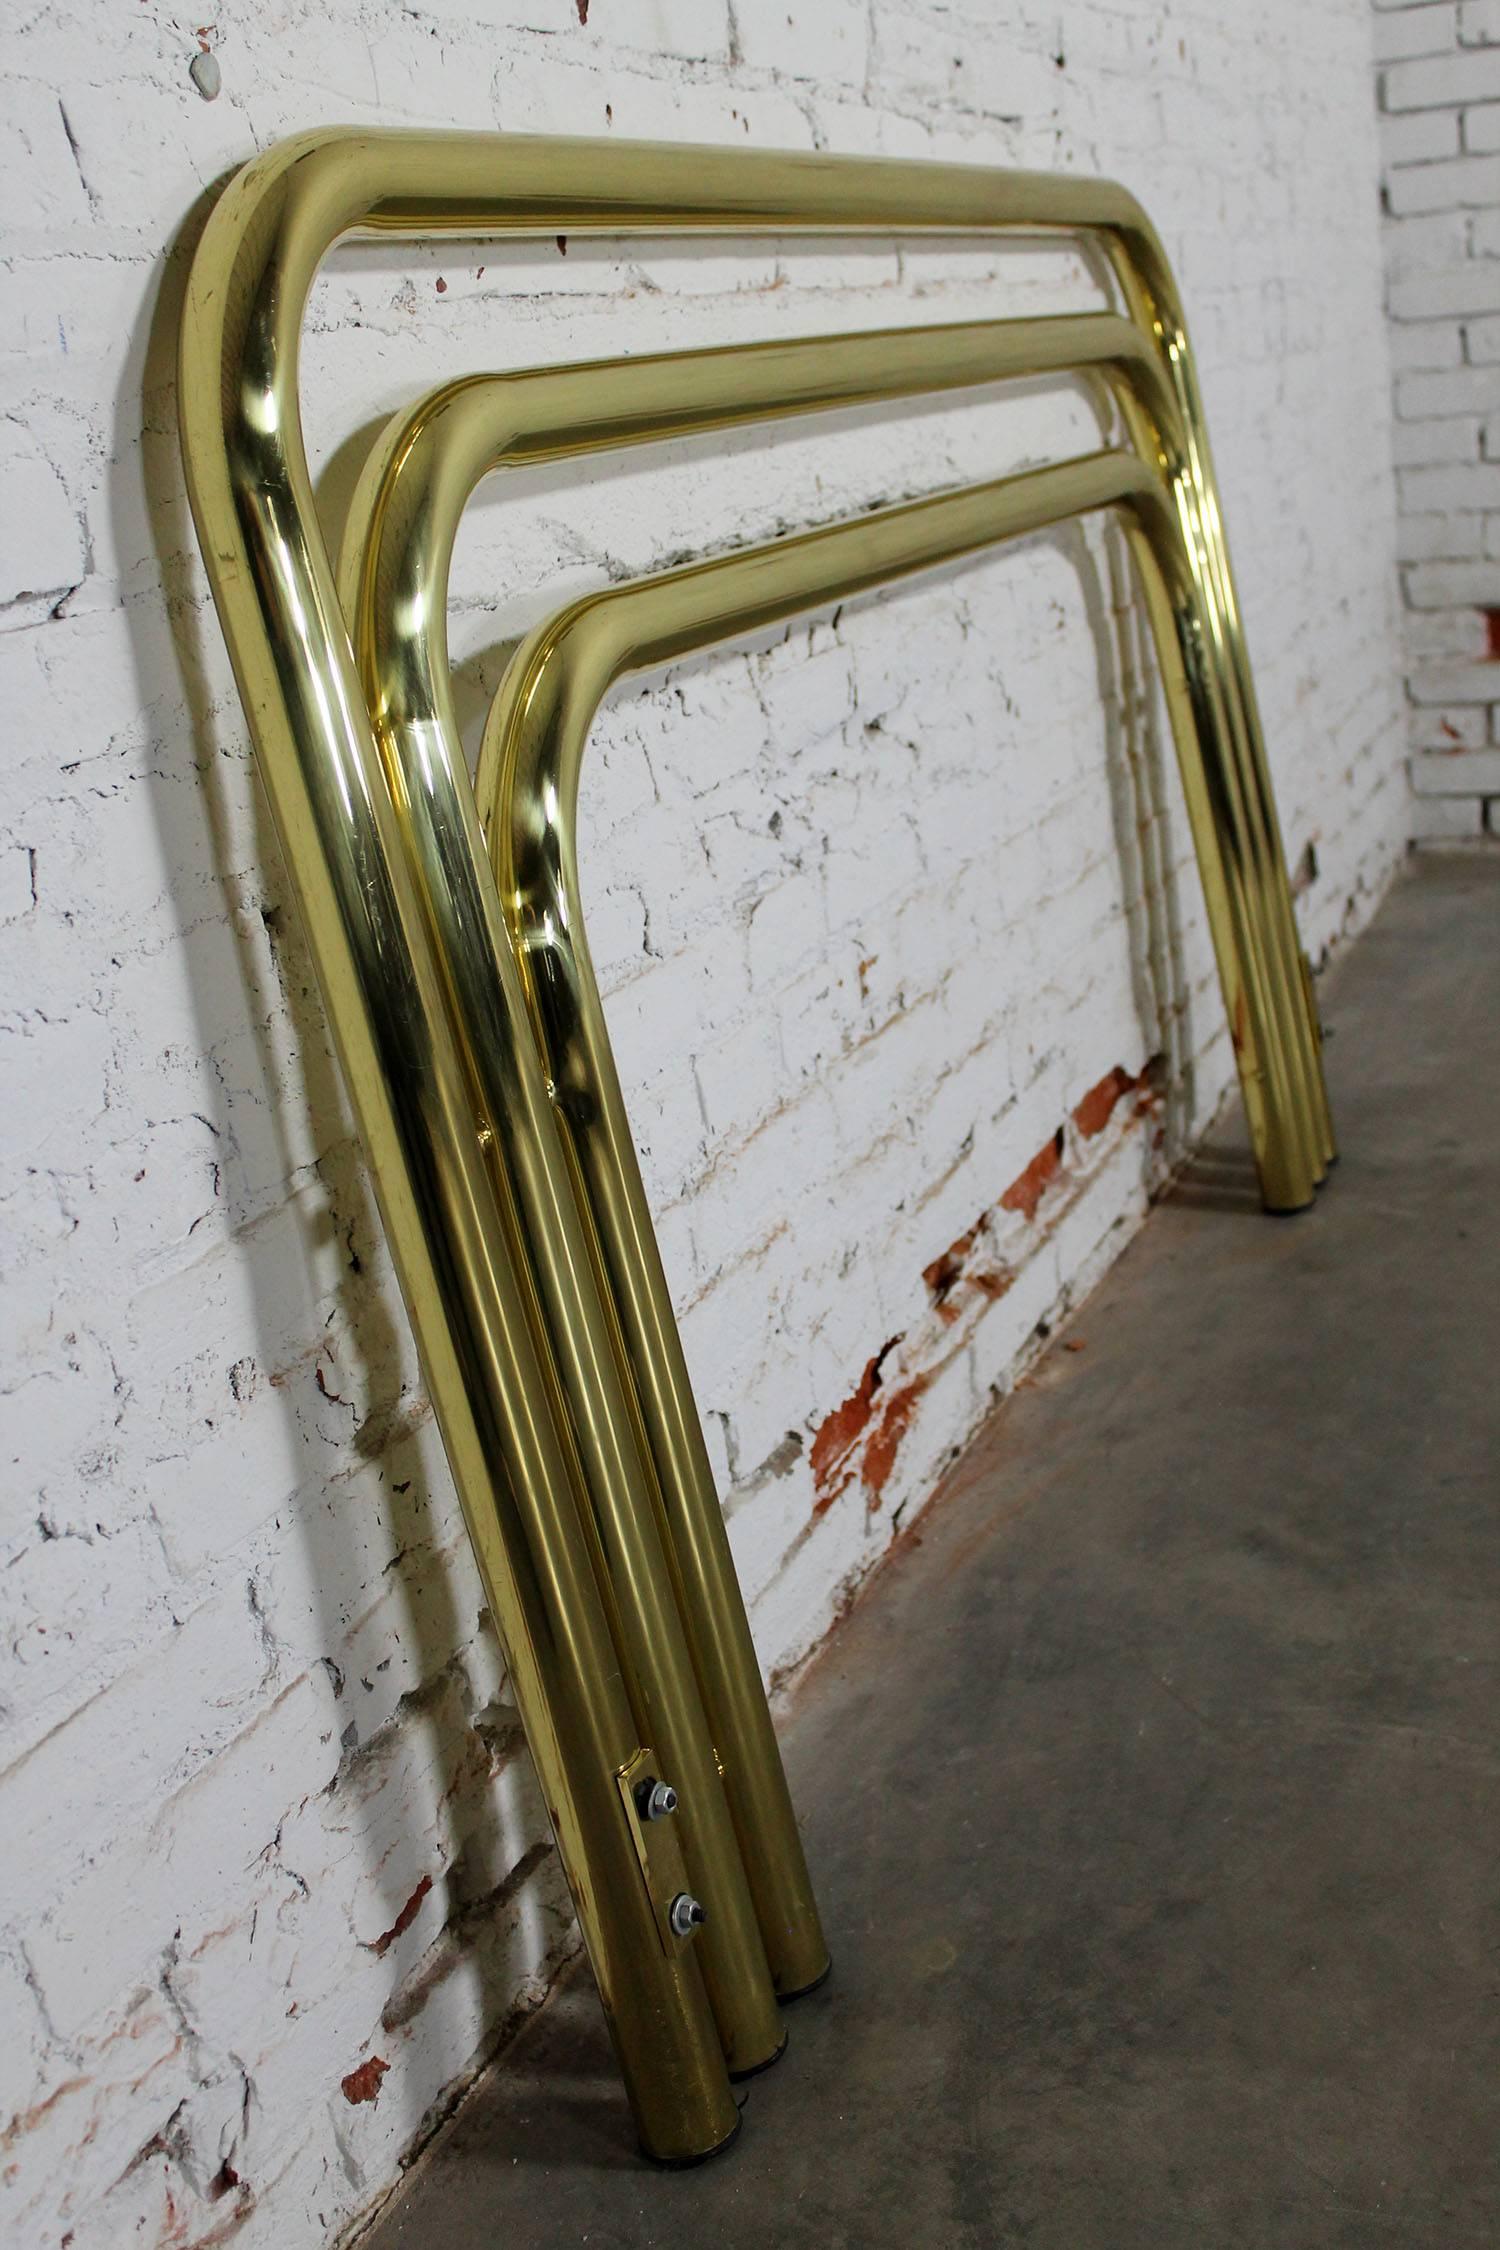 Wonderful circa 1970s brass tubular full or queen-size headboard done in the bold style of Milo Baughman. In wonderful vintage condition; it does have some small scratching but nothing major.

I love the bold and fluid lines of this beautiful circa